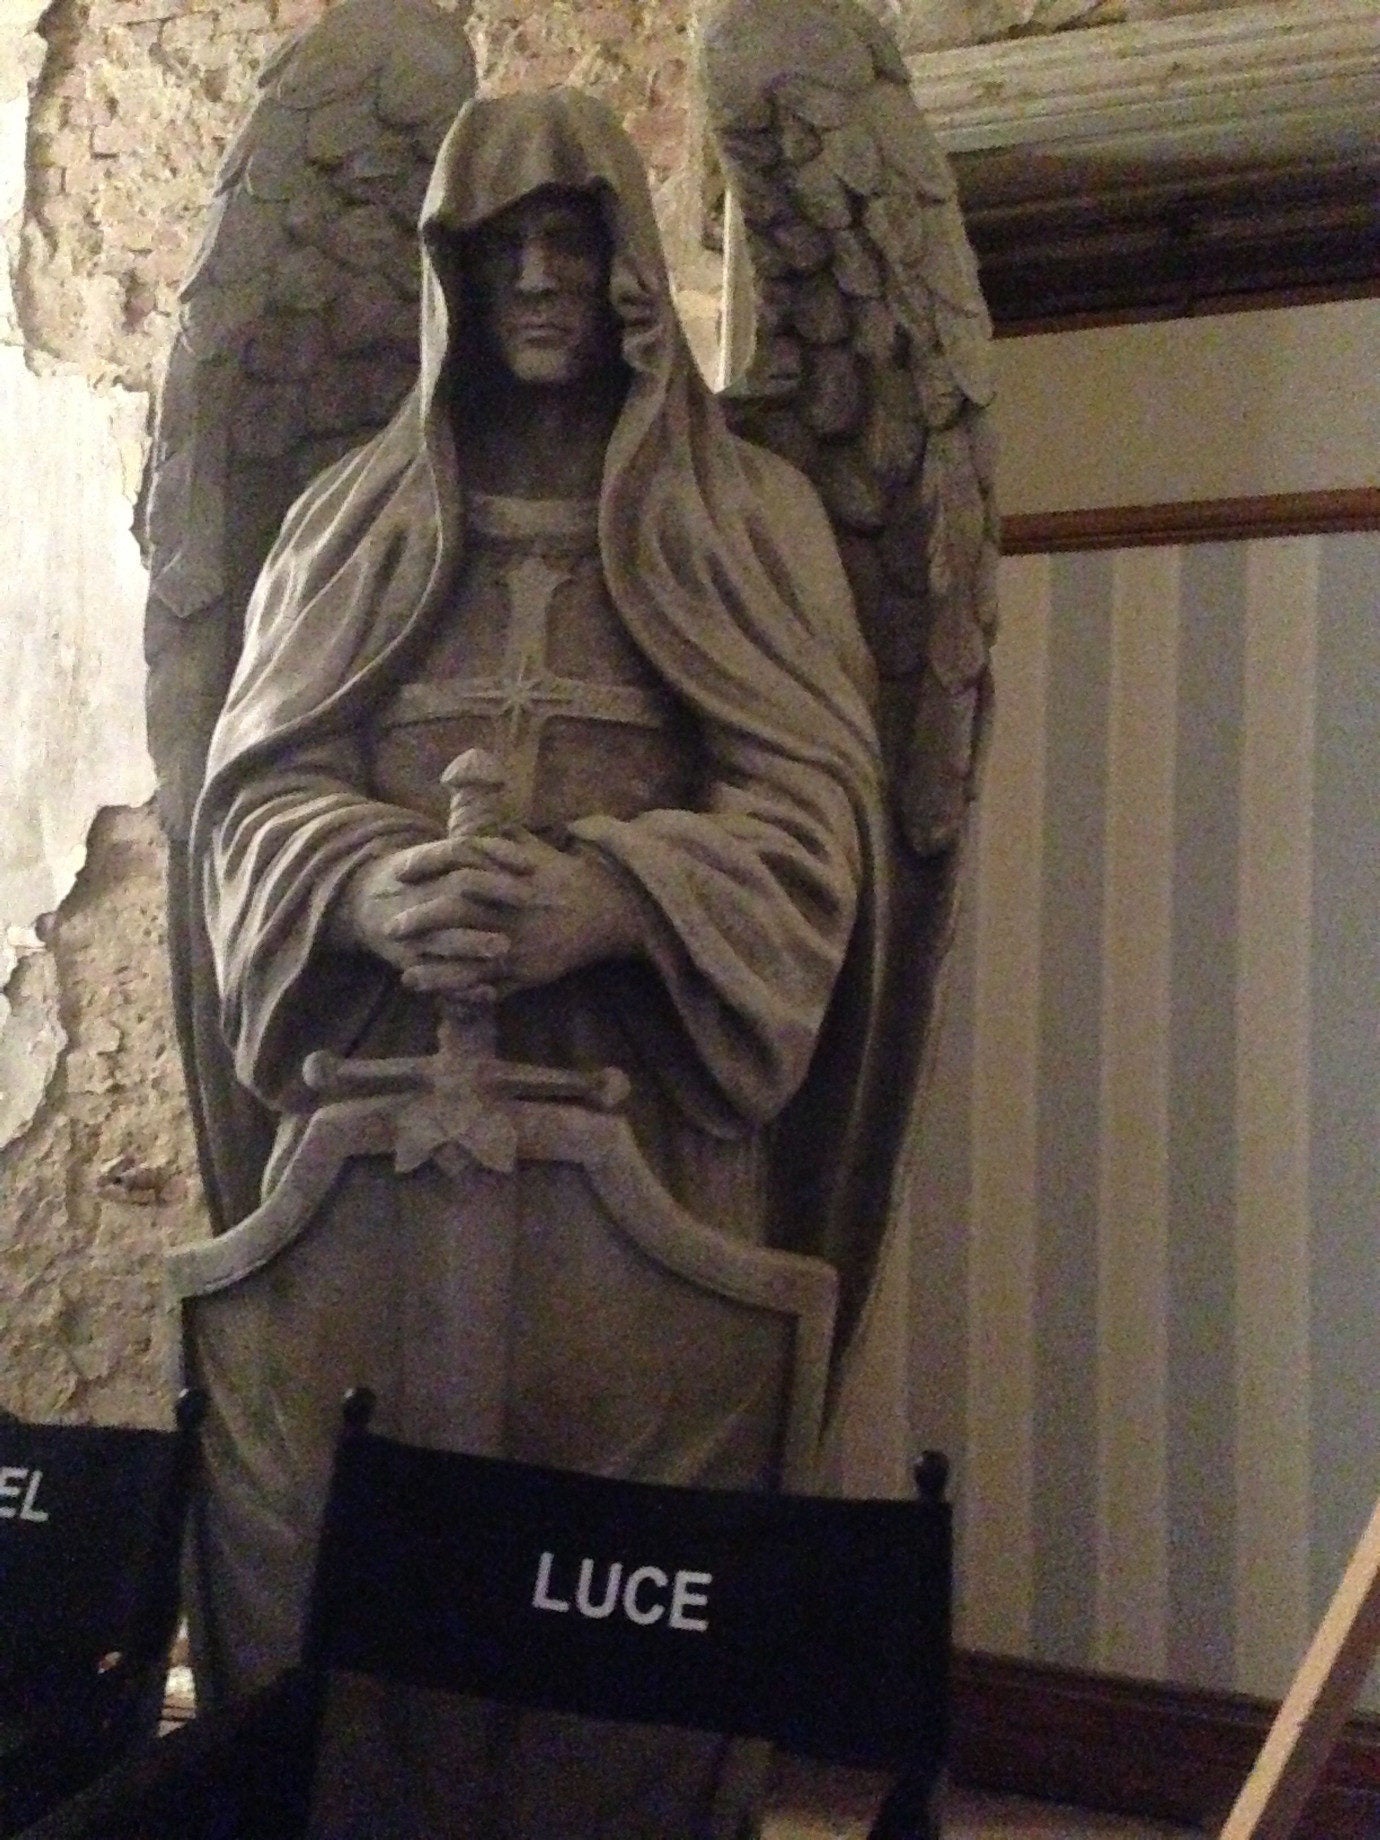 This statue didn’t want to leave Luce alone. . . .